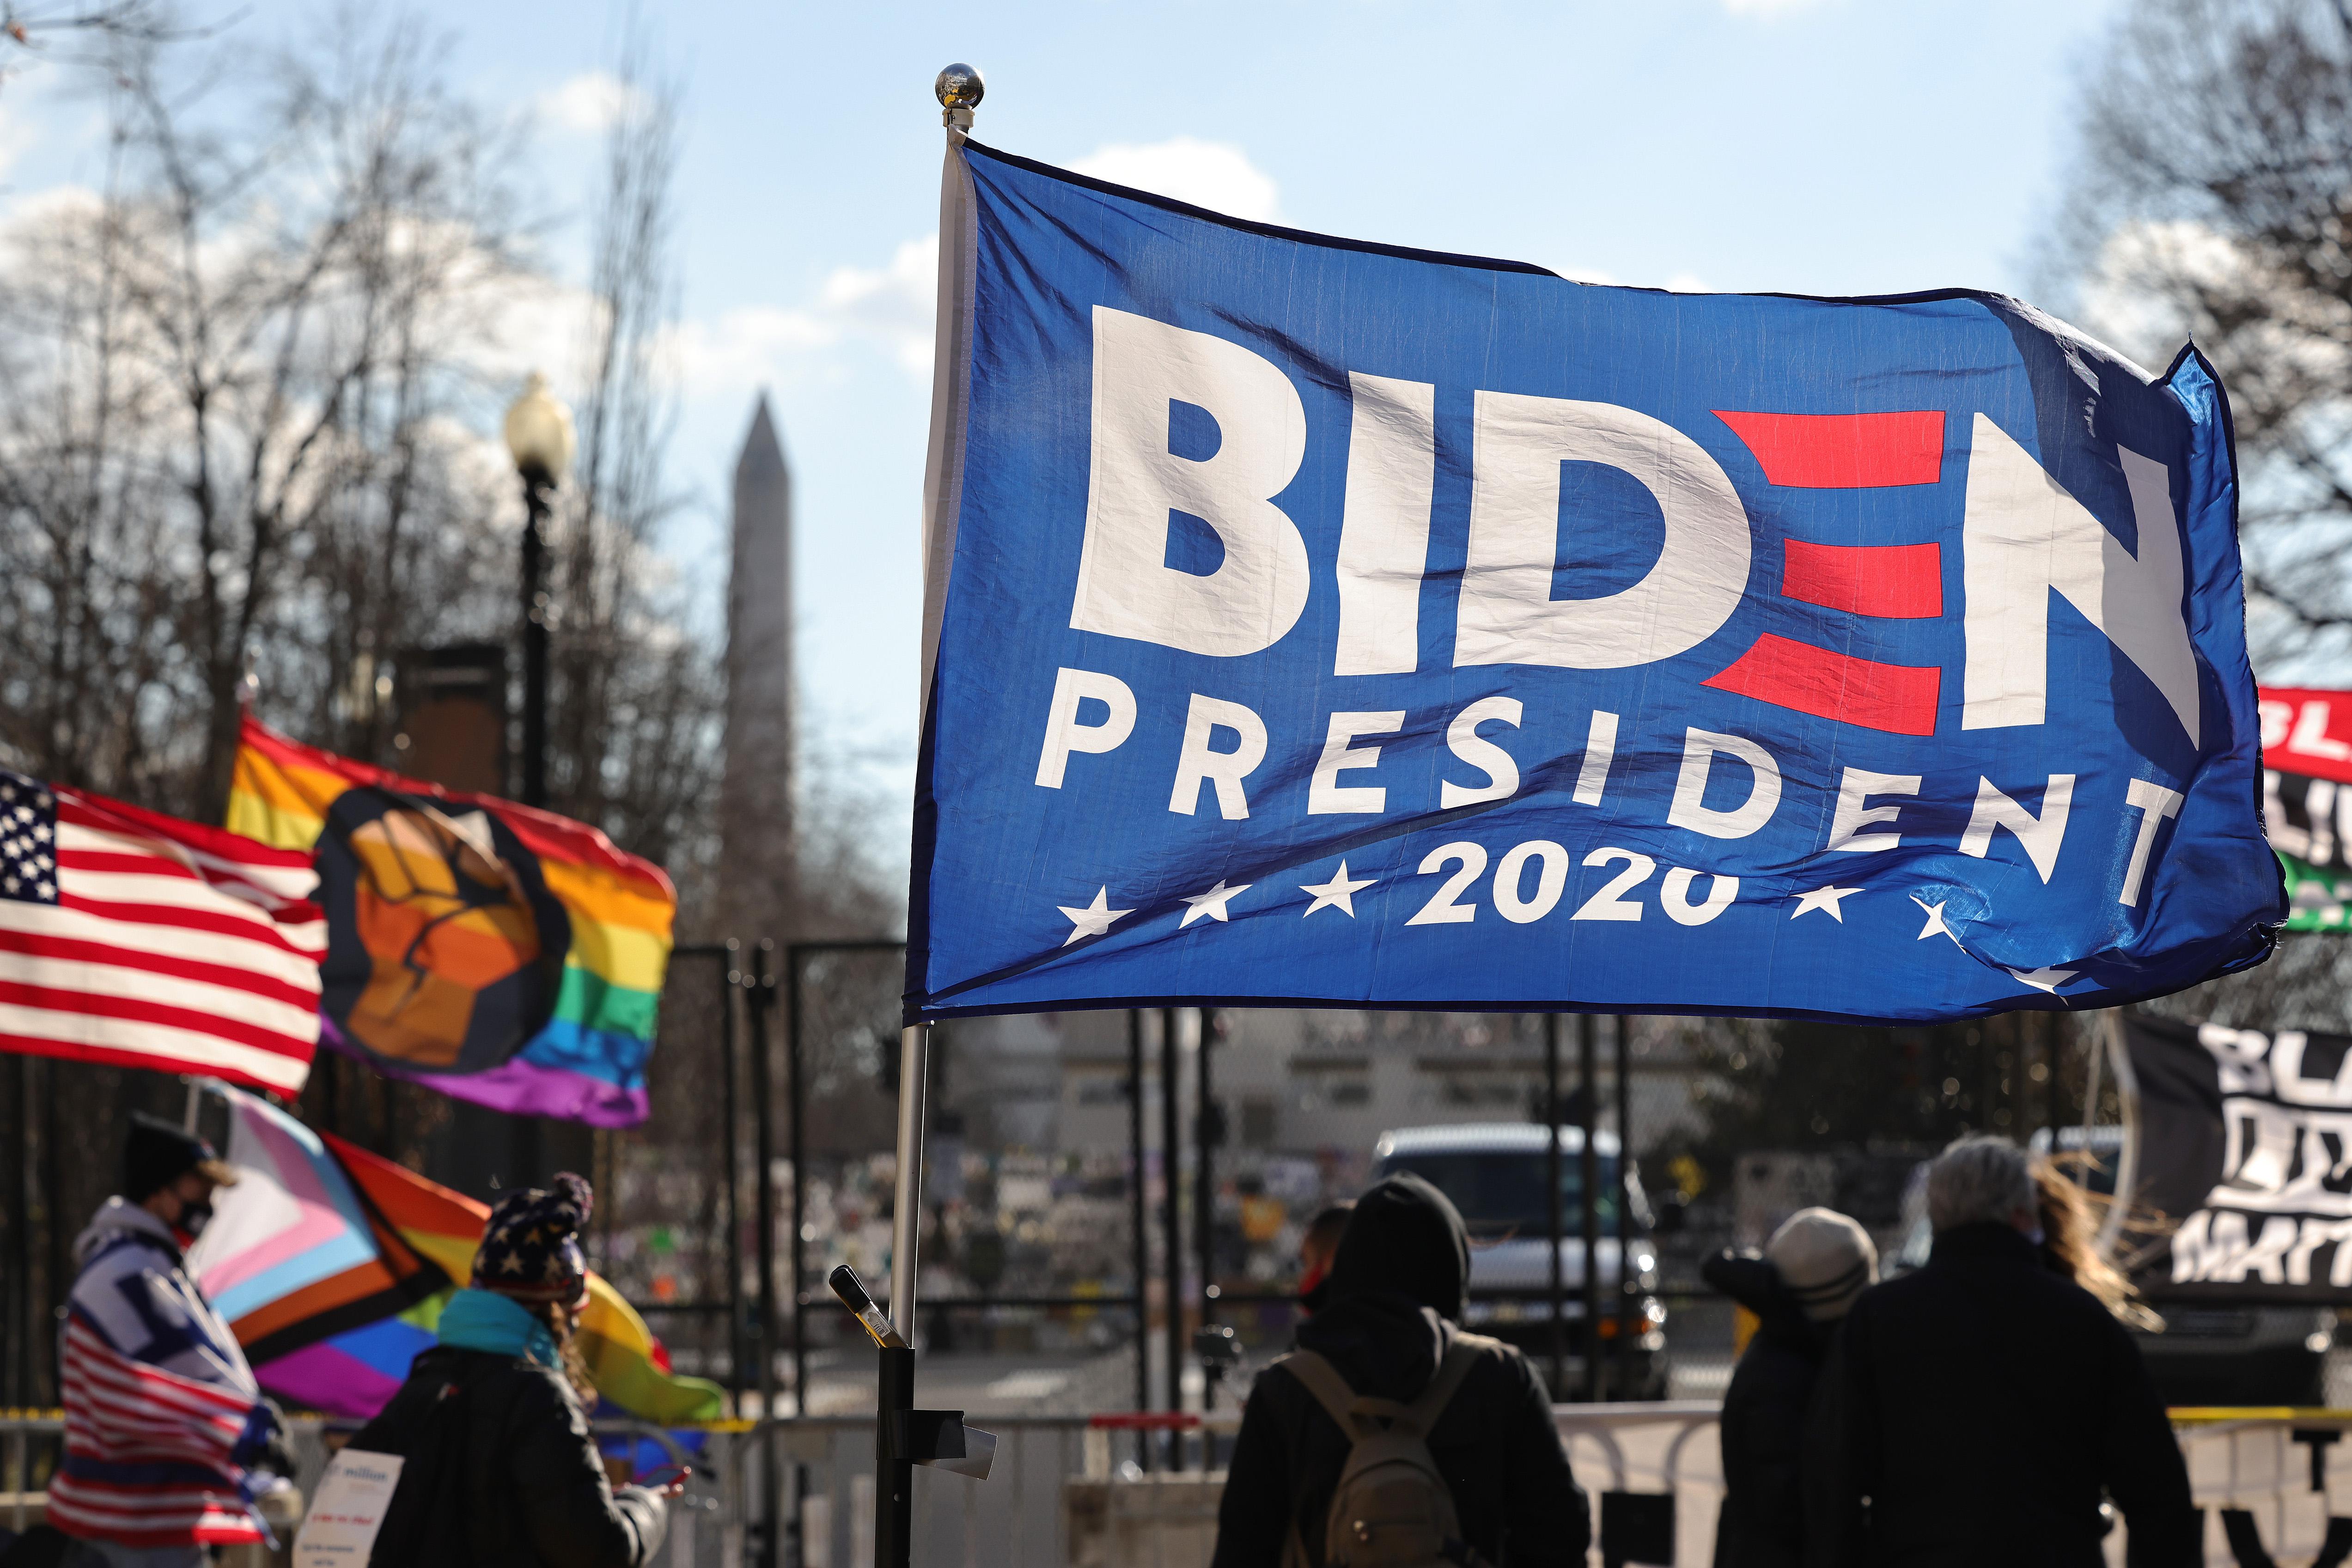 A Biden flag waves in the wind, with rainbow flags in the background